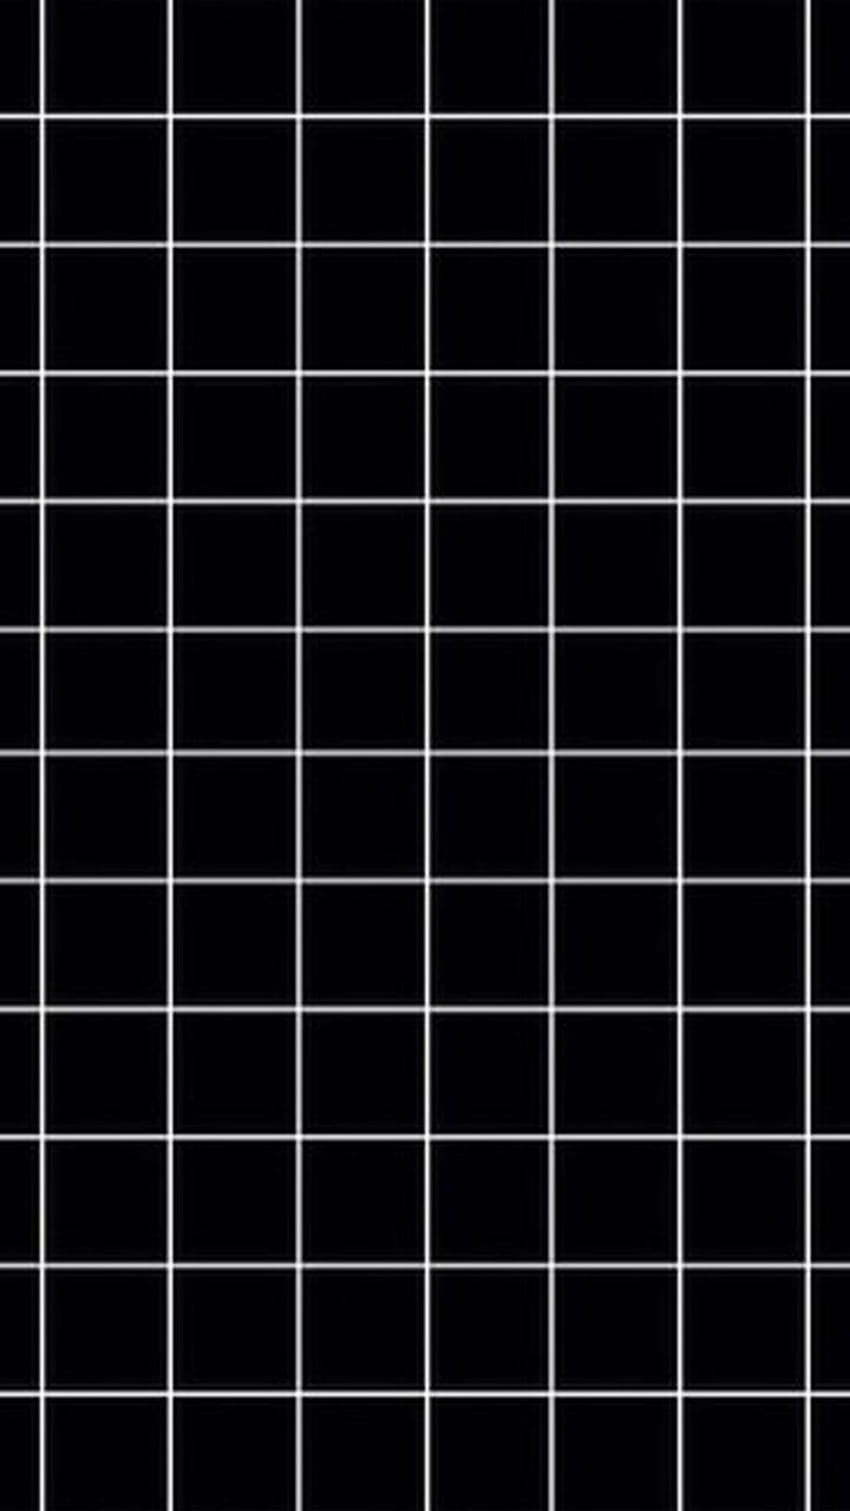 Black and white grid wallpaper for iPhone and Android - Grid